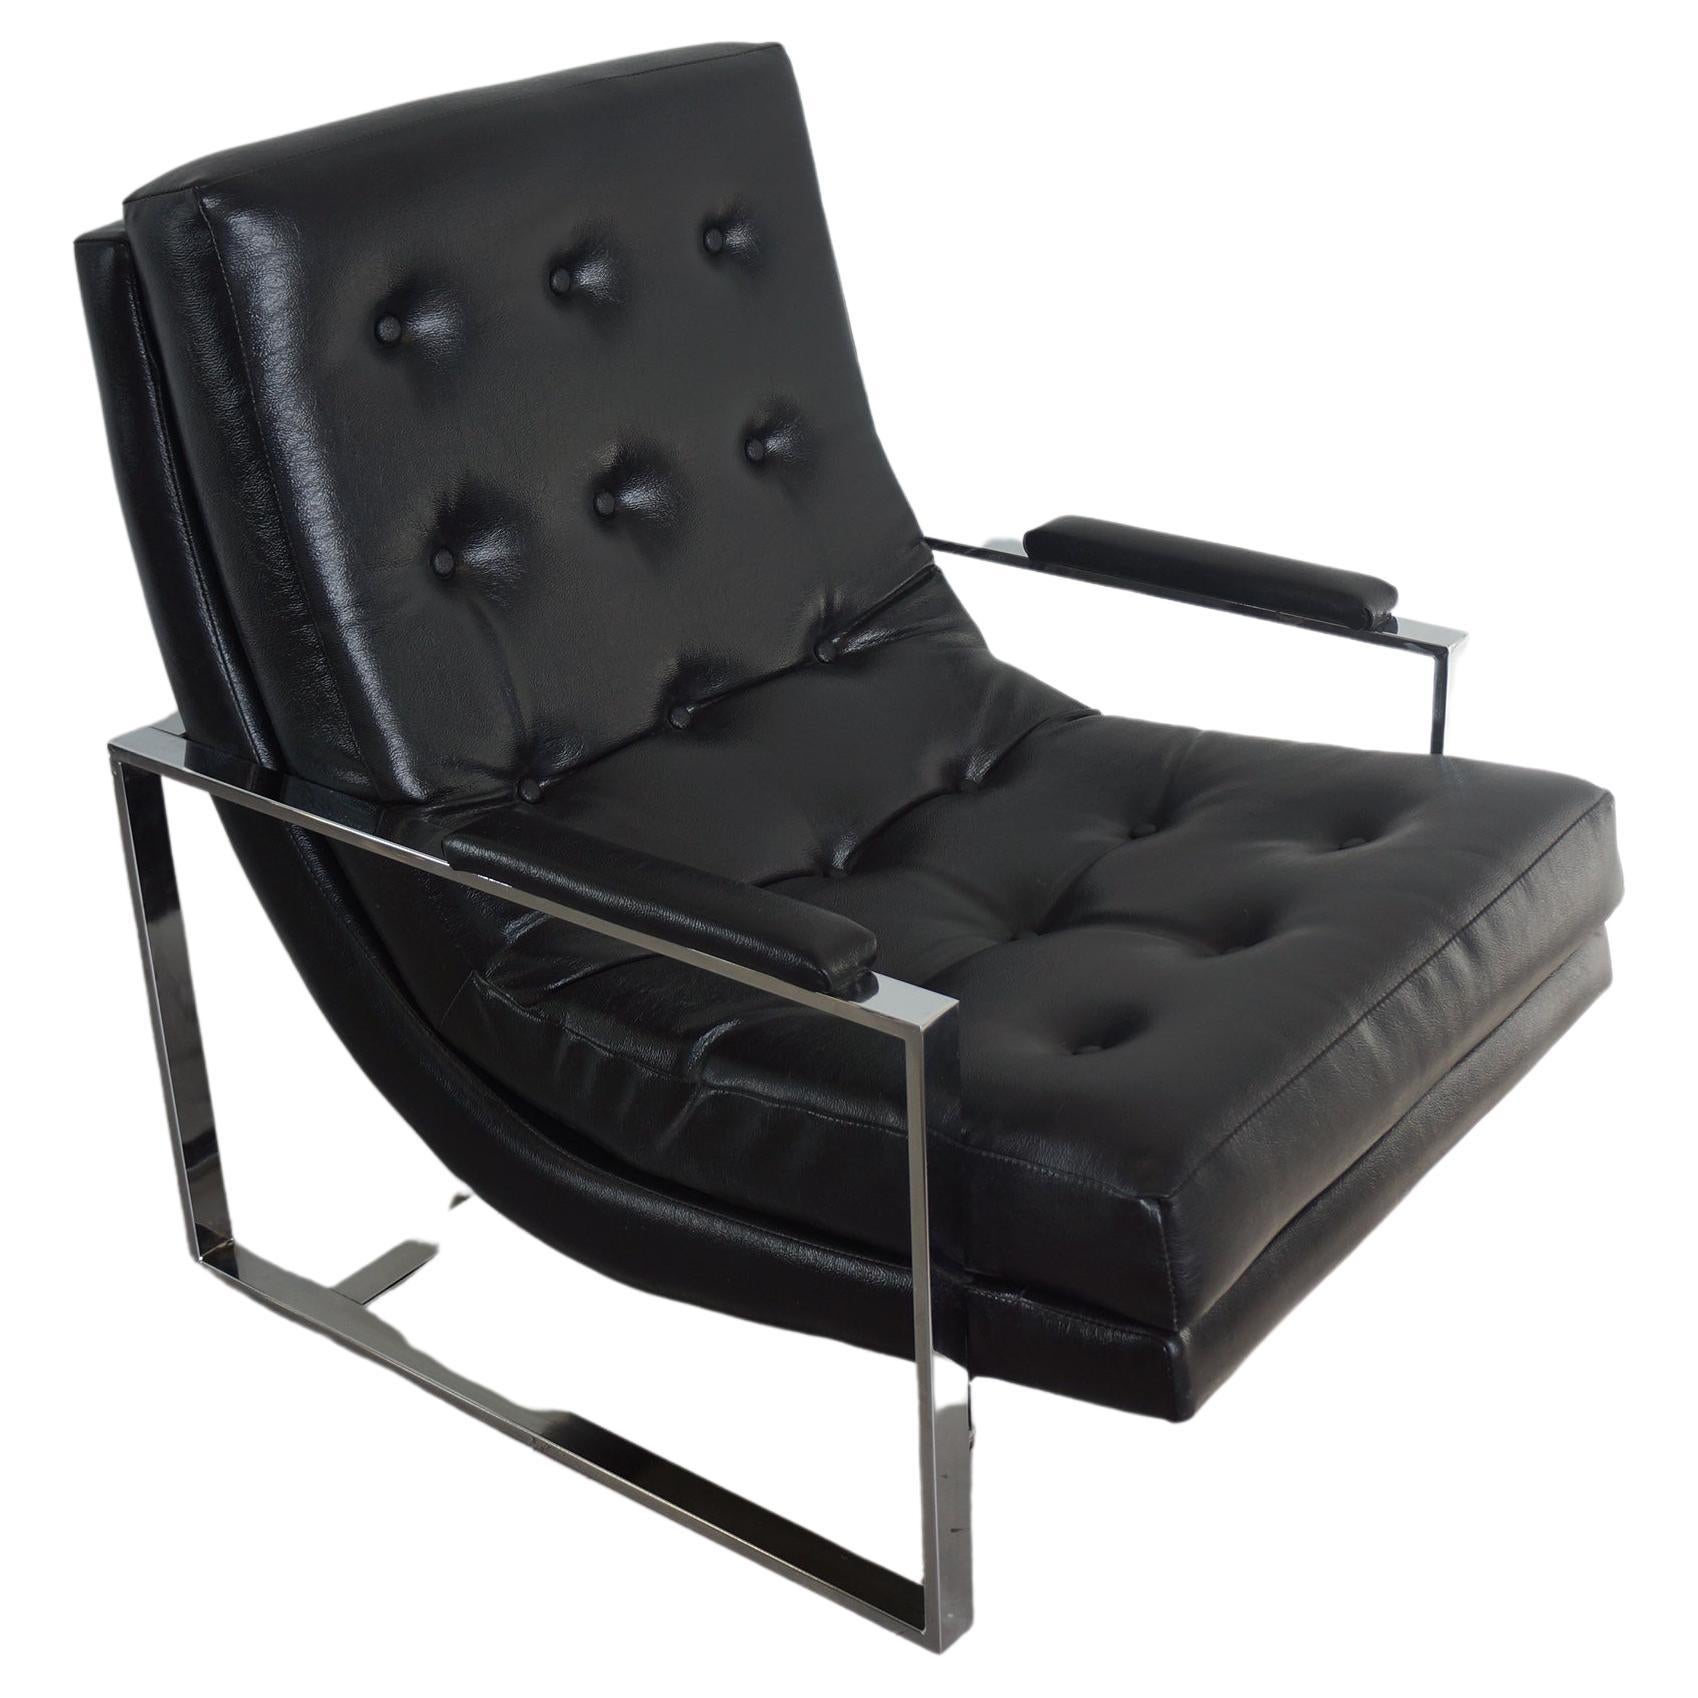 Spectacular mid century modern lounge chair in tufted leather and chrome. This incredibly comfortable lounge chair features a chrome body with a tufted leather seating. In the style of  William Katavalos, Ross Littell, and Douglas Kelly. 
In overall